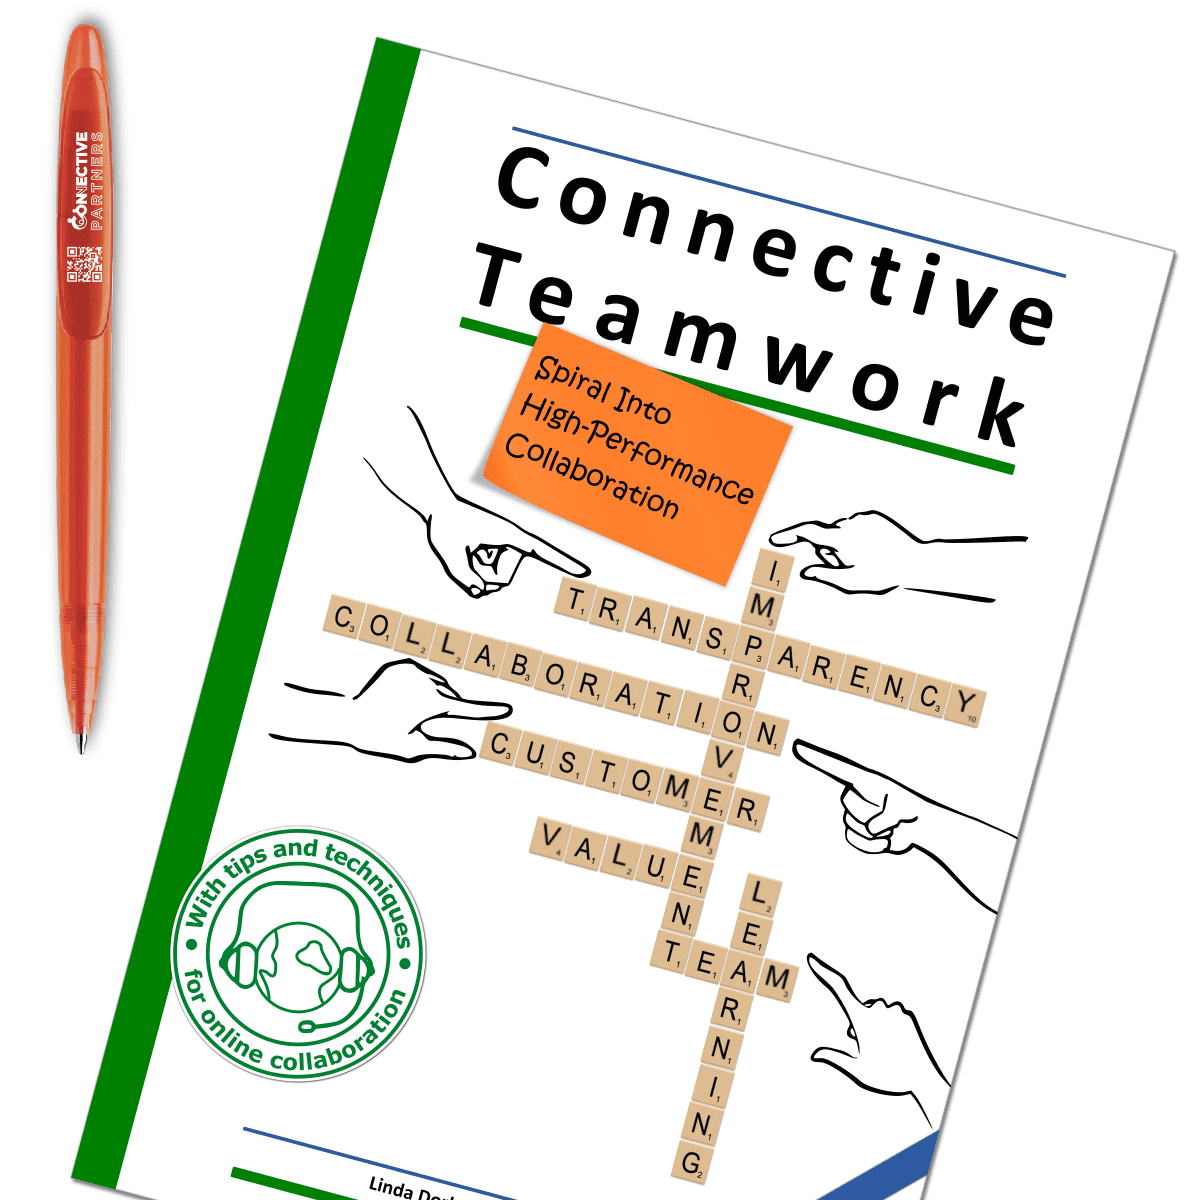 Book on teamwork and collaboration with pen and hand graphics.